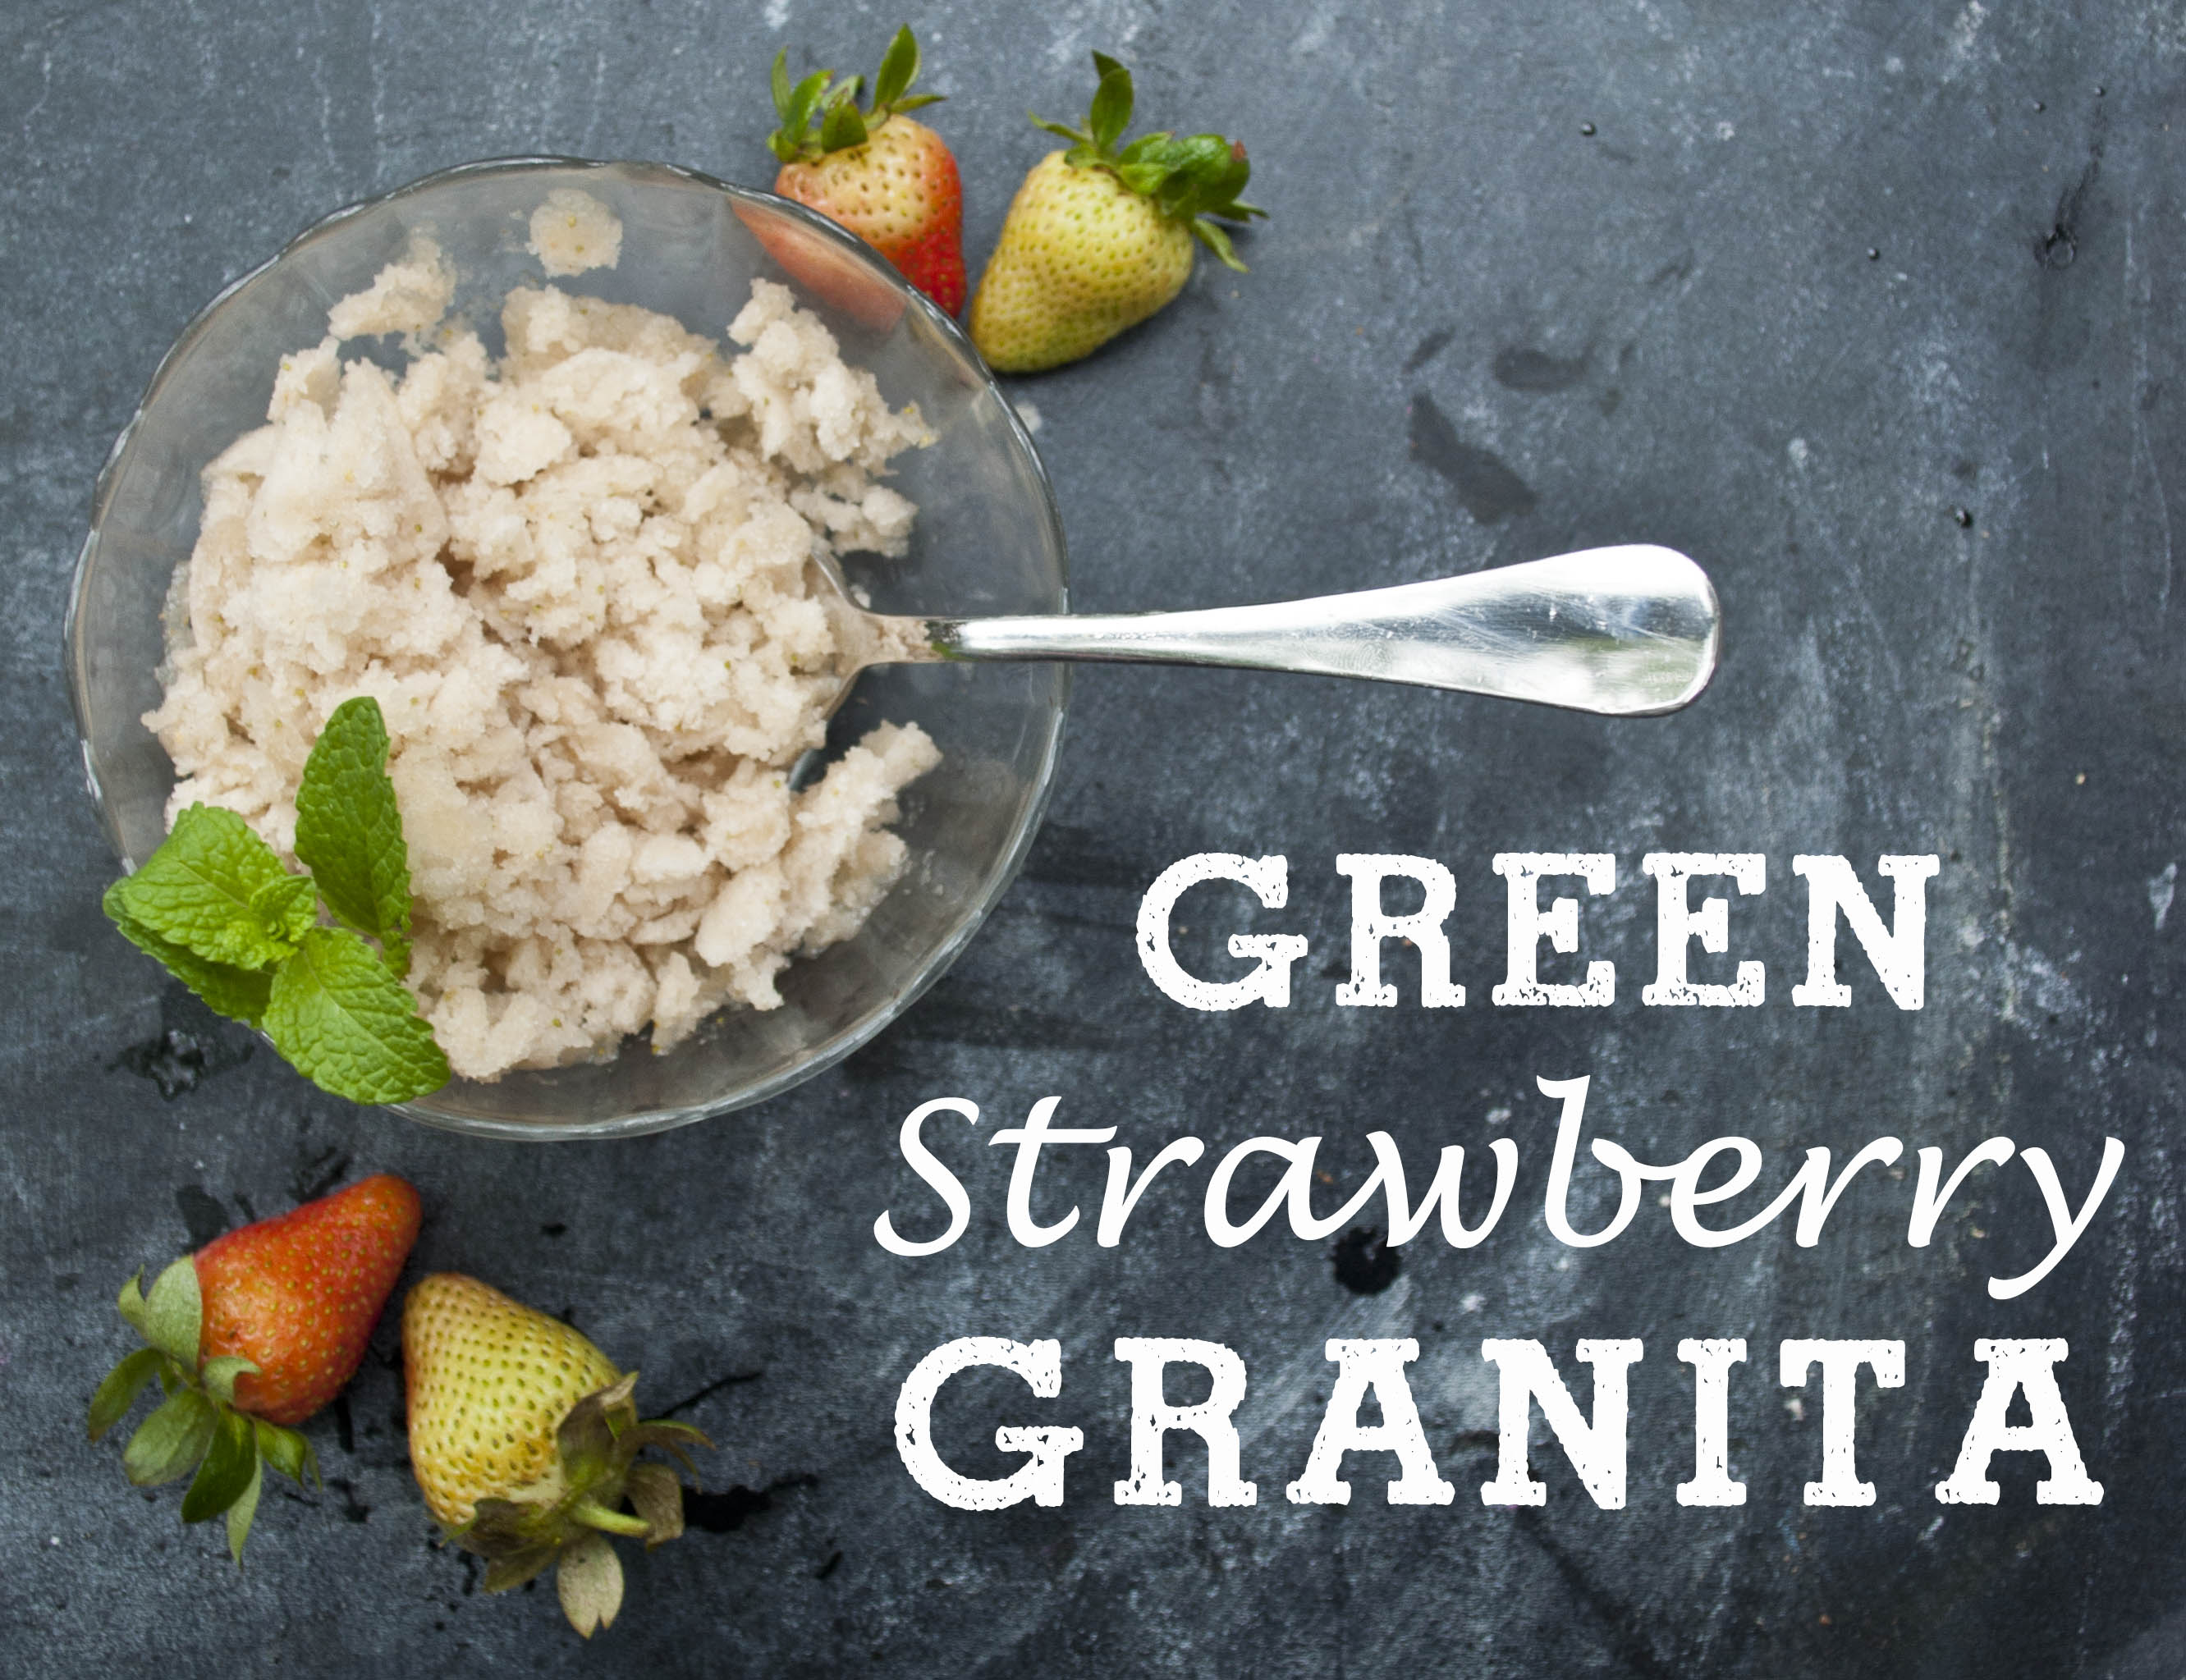 Green Strawberry Granita - the perfect use for green unripe strawberries. Great refreshing flavor with a hint of tart, the perfect summer treat.